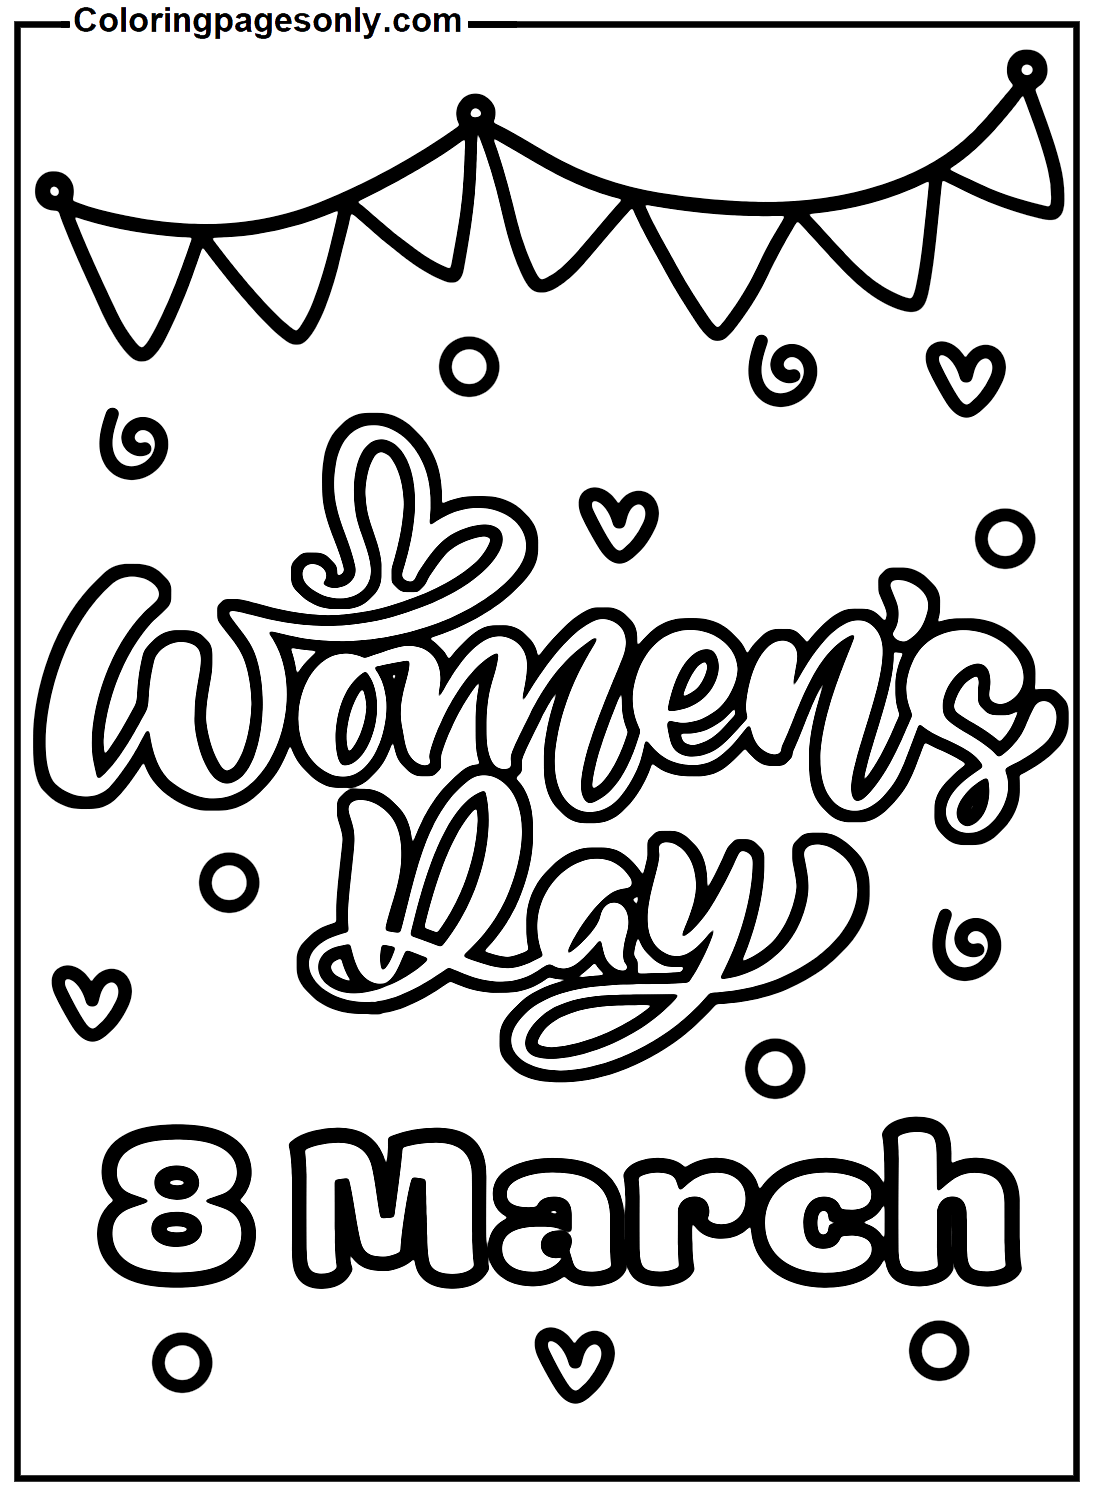 Women's Day 8 March Coloring Pages